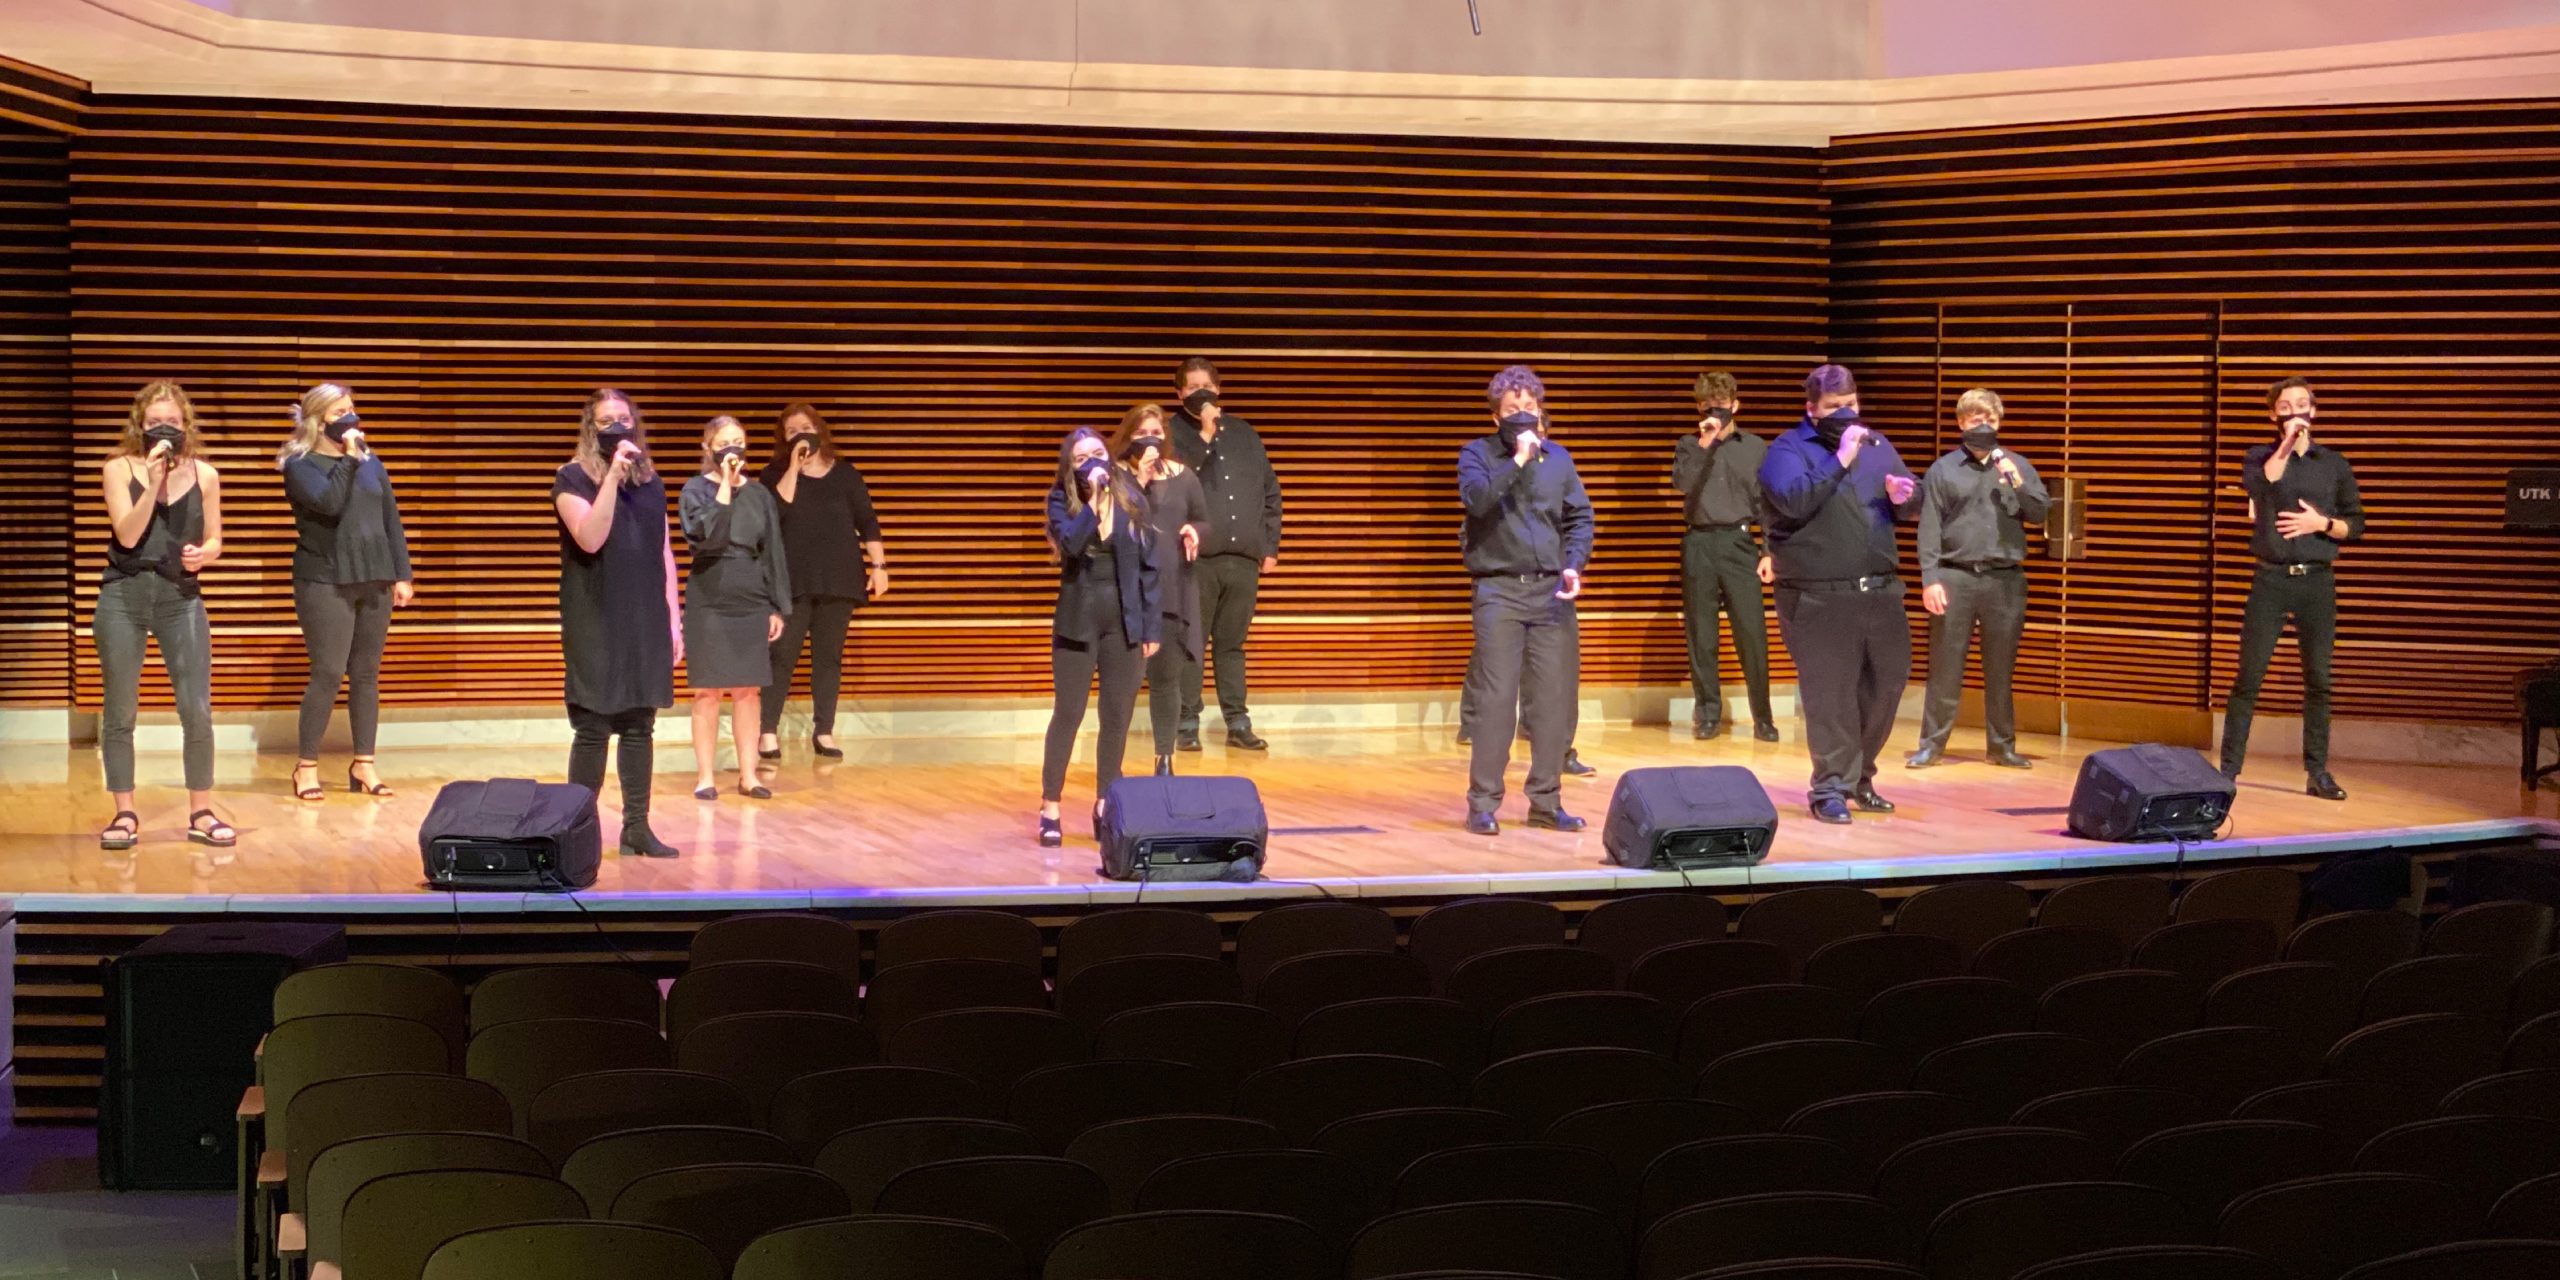 The UT Singers perform in the Sandra G. Powell Recital Hall while wearing masks and being proprerly socially distanced.